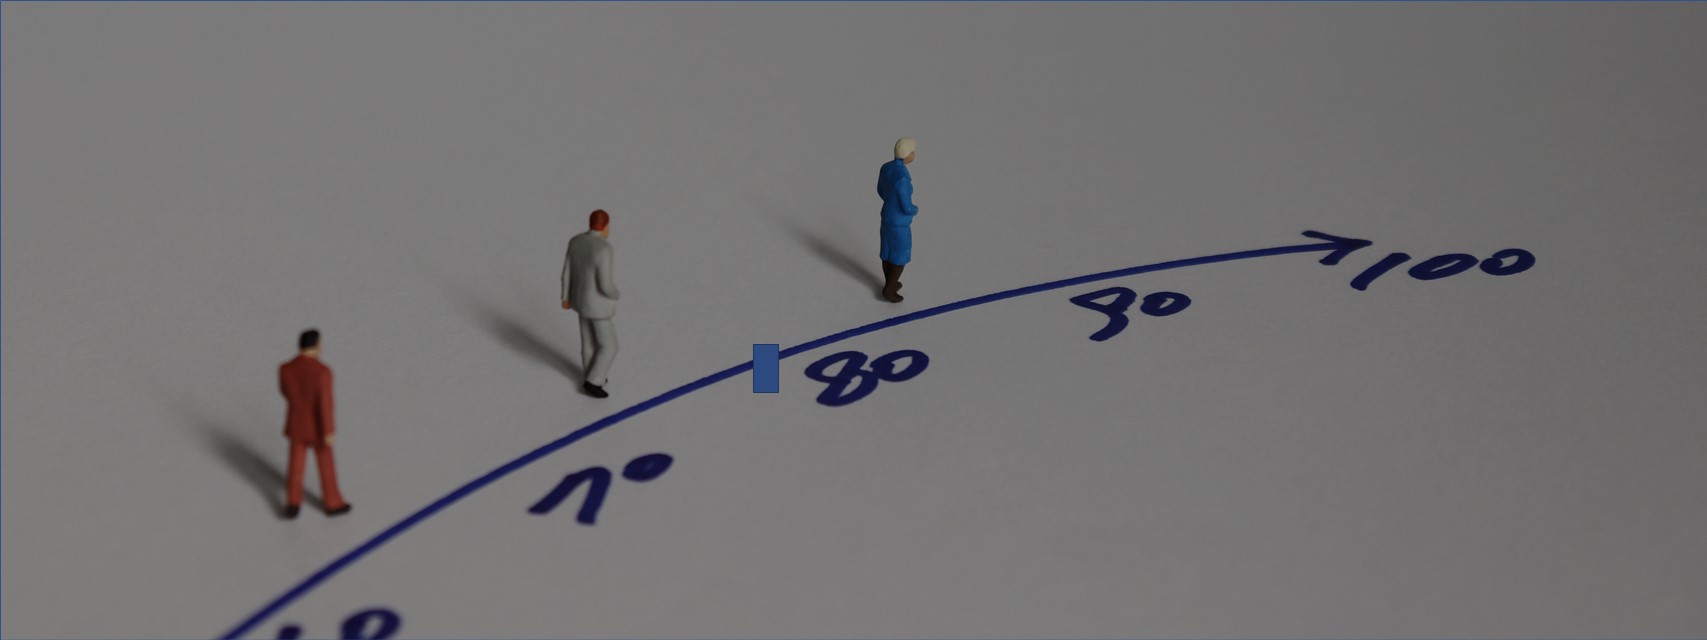 Trendline of retirement ages with toy figures for businessmen standing at each age.